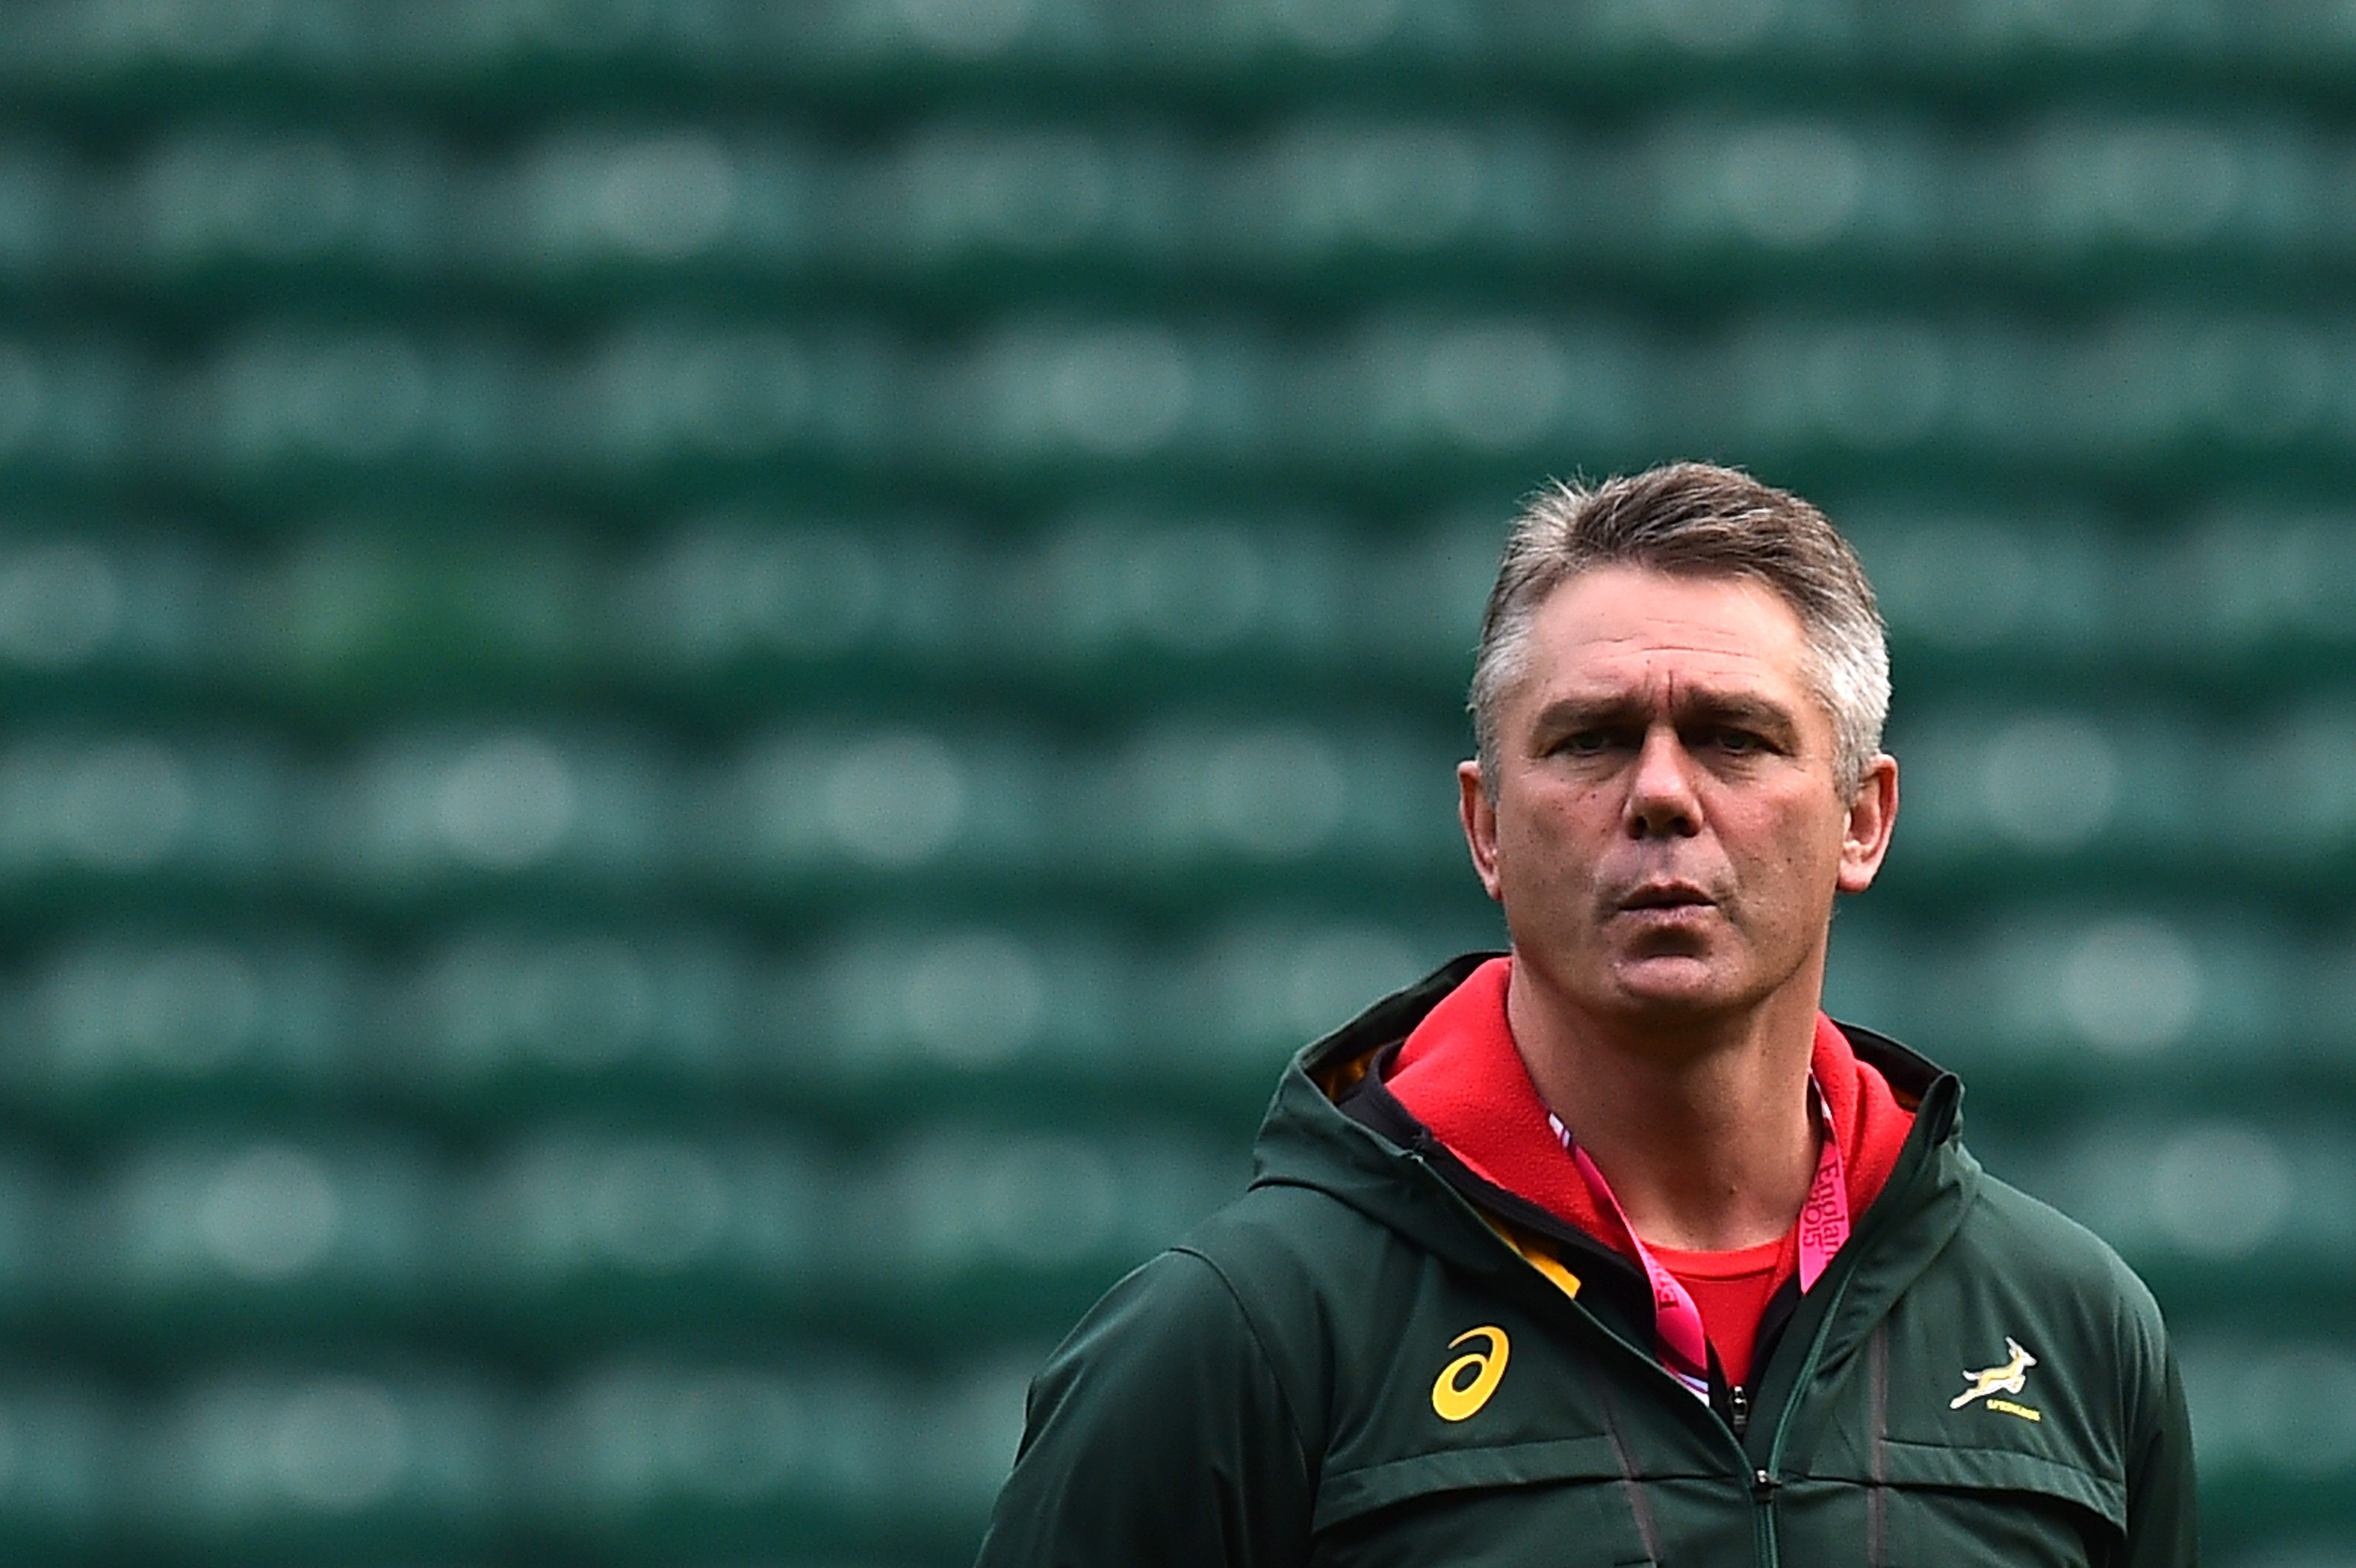 (FILES) This file photo taken on October 23, 2015 shows South Africa's head coach Heyneke Meyer watching his players during the captain's run at Twickenham Stadium, west of London, on the eve of the team's 2015 Rugby Union World Cup semi-final match against New Zealand. Meyer is to step down from his position, the South African Rugby Union (SARU) announced on Twitter December 3, 2015. / AFP / GABRIEL BOUYS